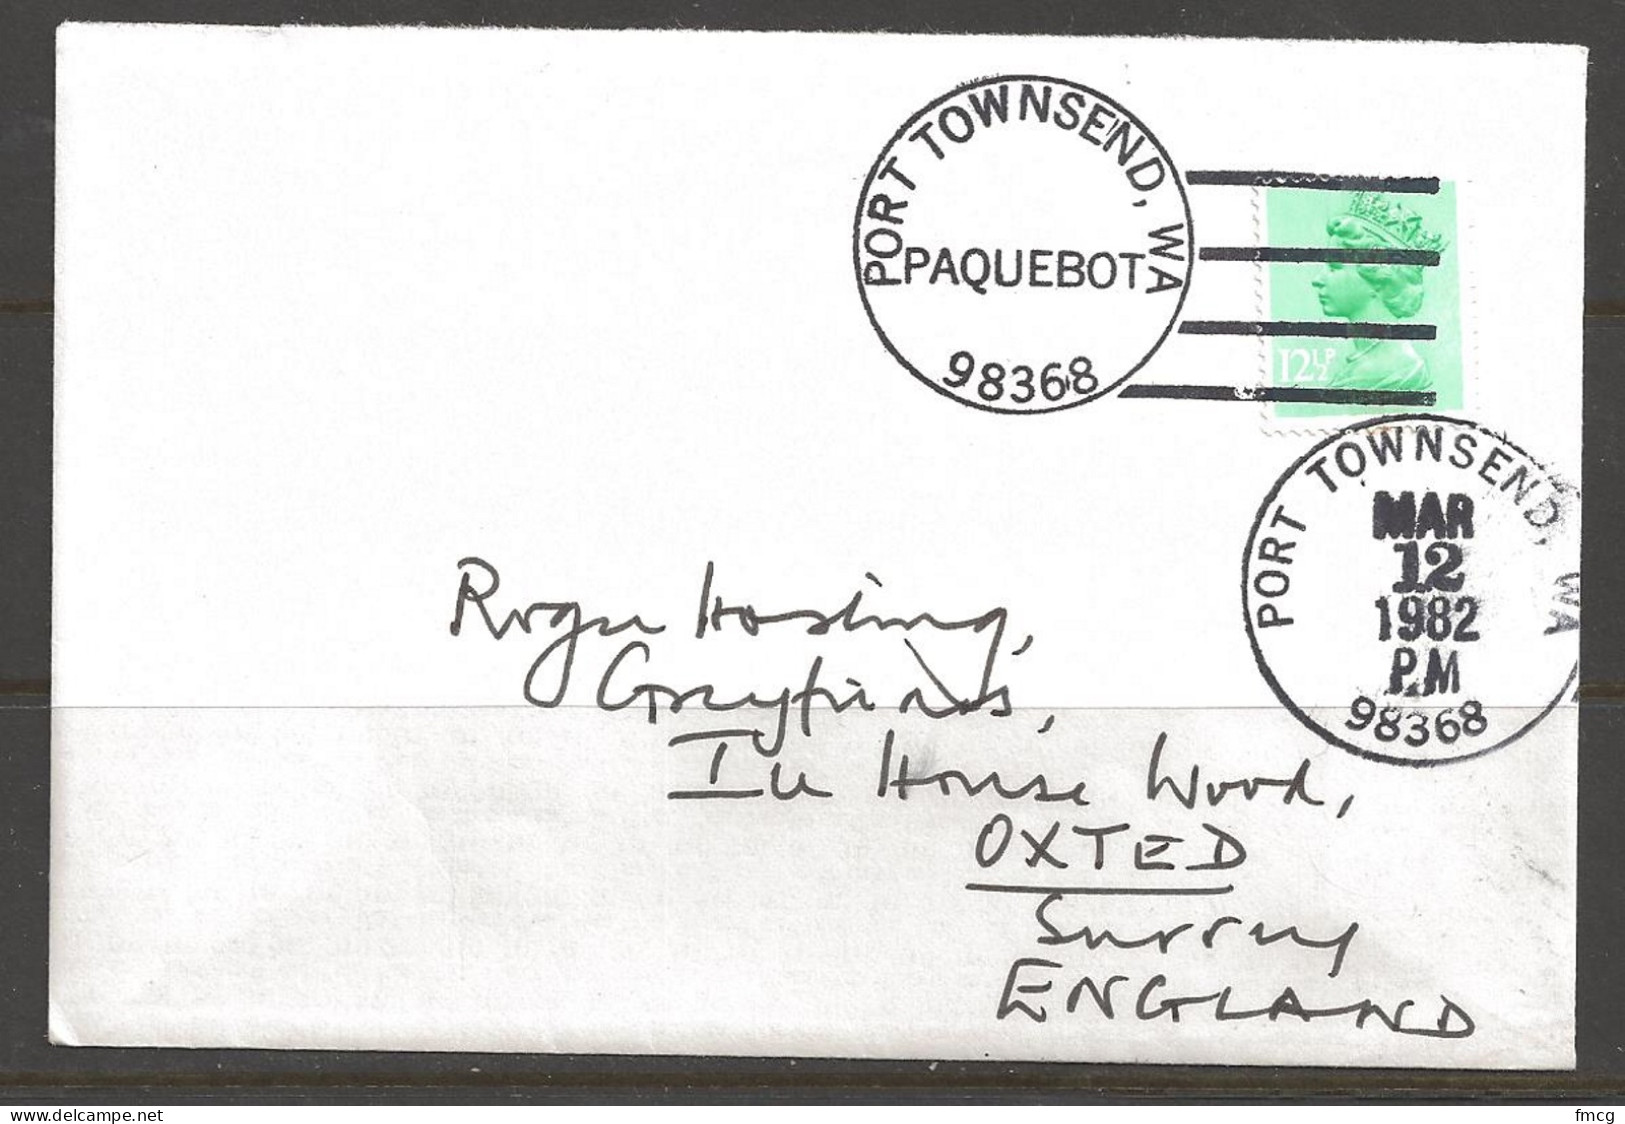 1982 Paquebot Cover, British Stamp Used In Port Townsend, WA (Mar 12) - Covers & Documents